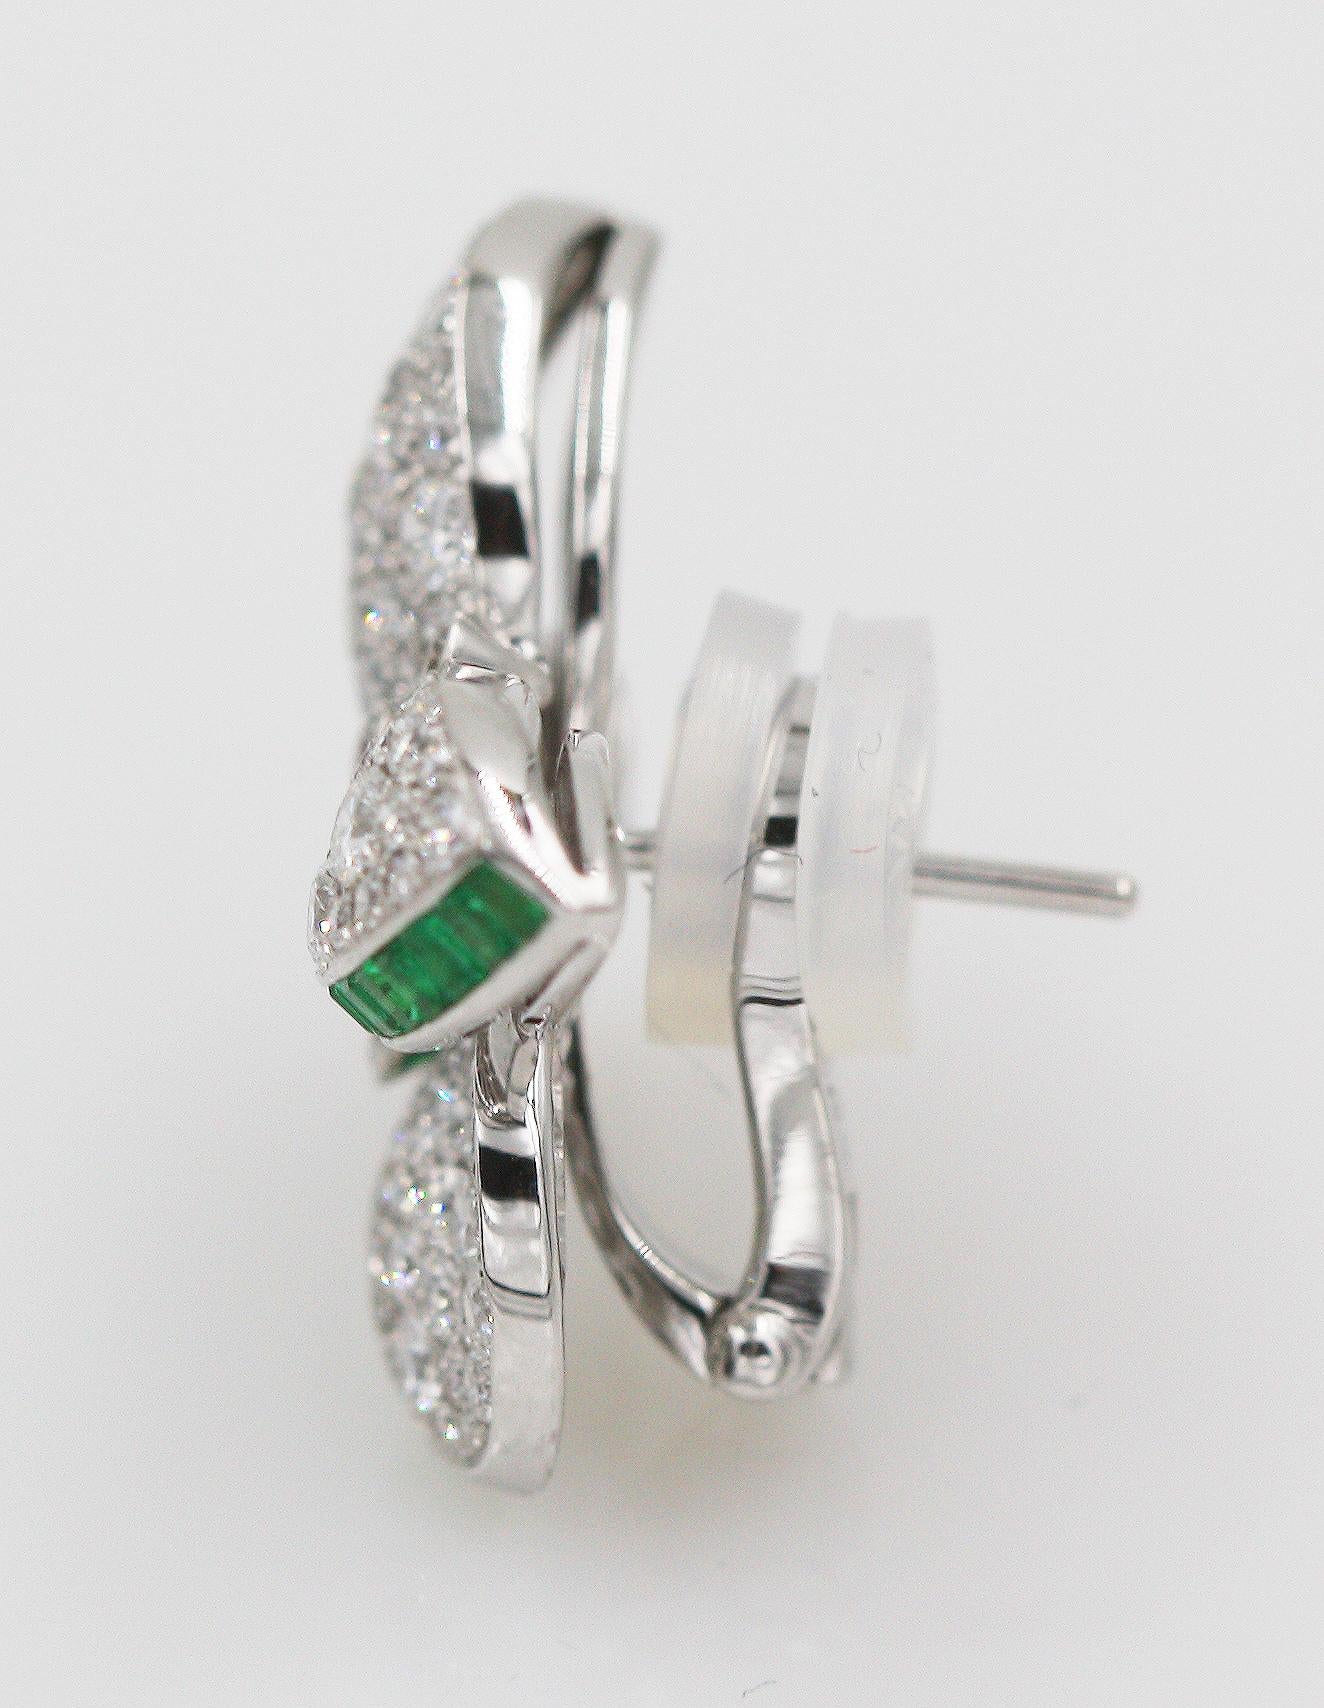 226 Round Diamonds weighing approx. 2.51 Carats. Fine White. Clarity: VS
96 Baguette Green Emeralds weighing approx. 0.94 Carats.
Total Diamond Weight approx. 2.51 Carats
Total Emerald Weight approx. 0.94 Carats
Come with Box and